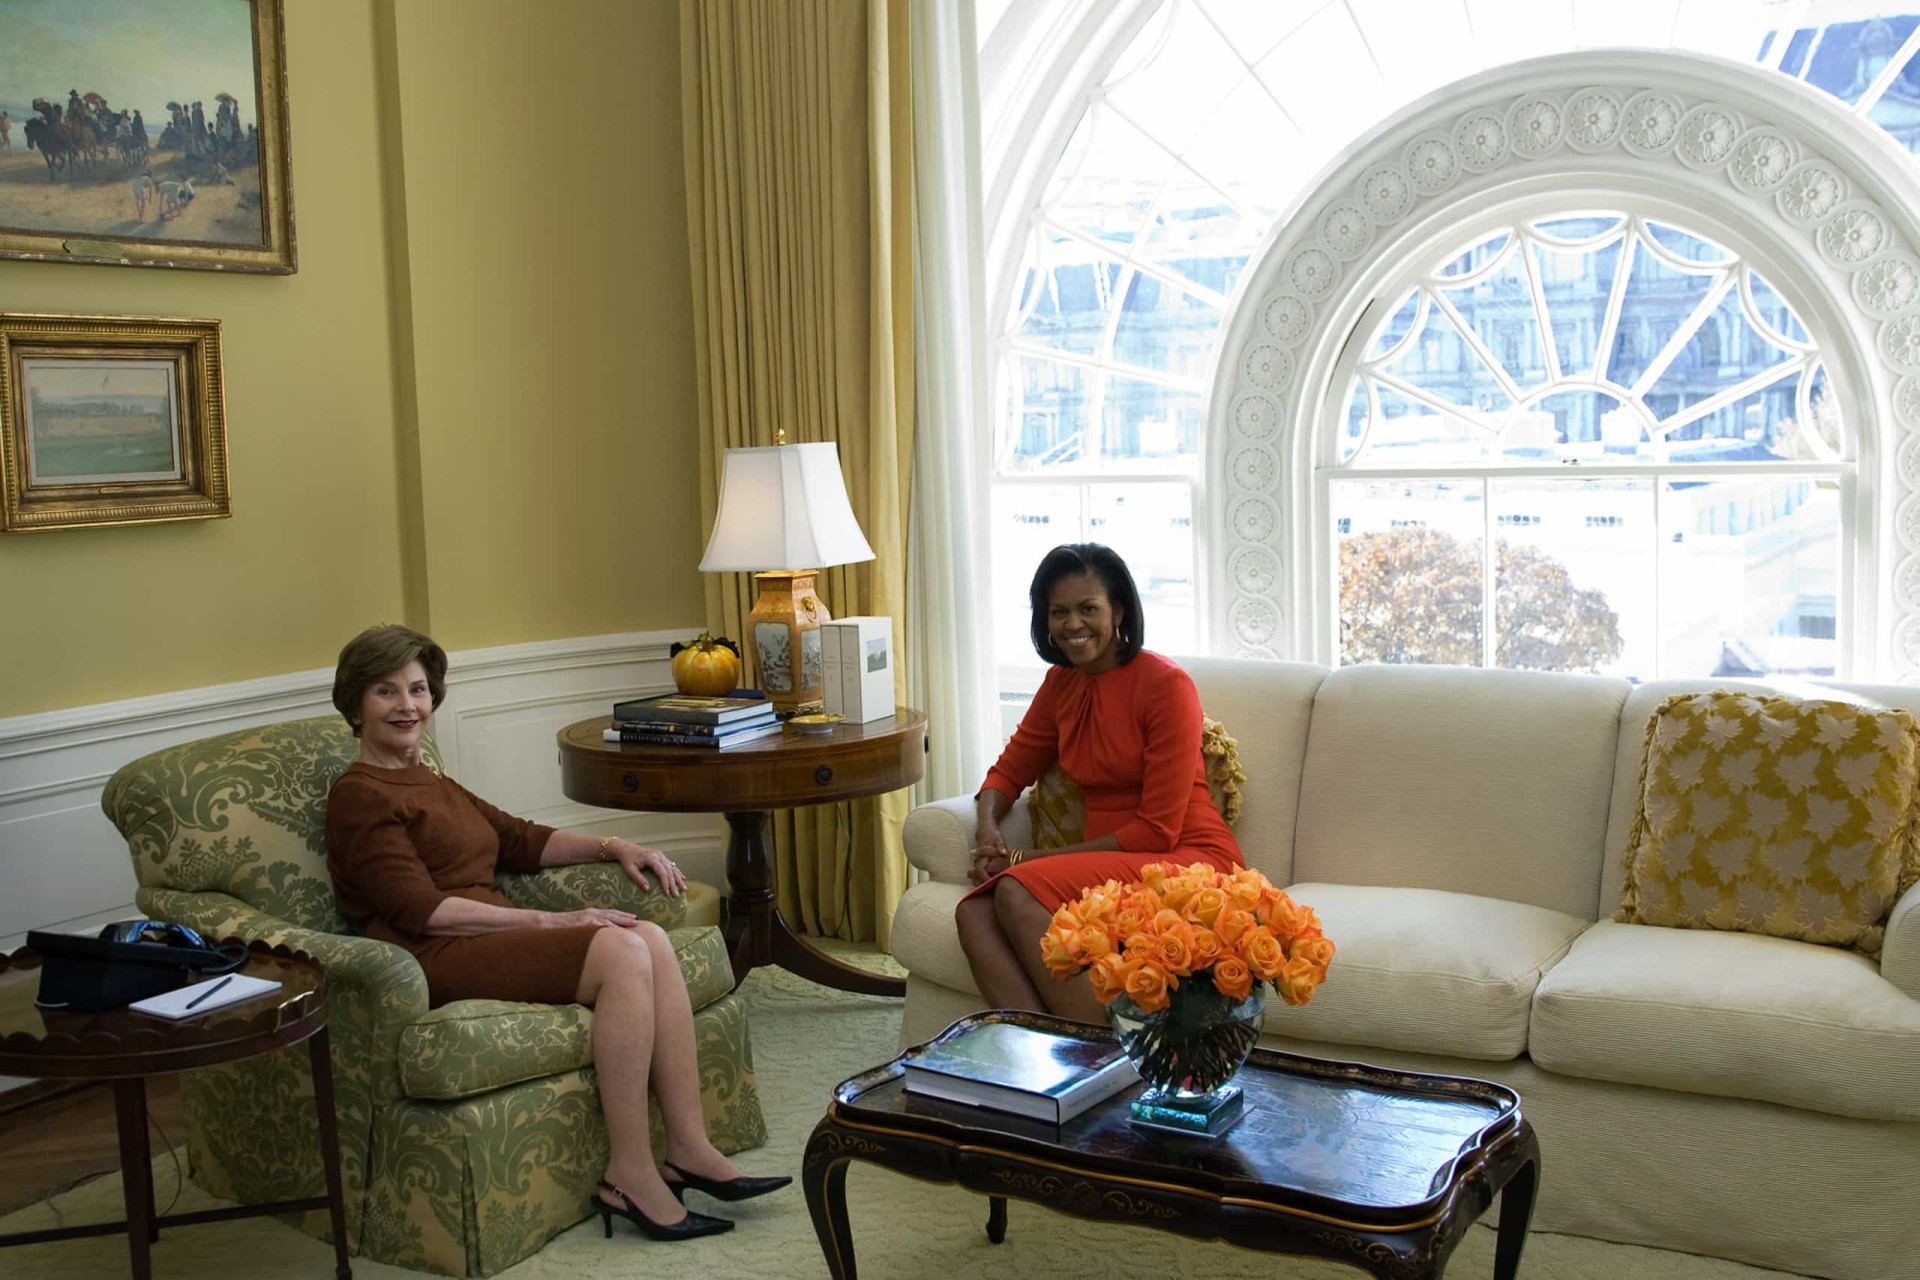 <p>After an election, the First Lady gives the First-Lady-To-Be a tour of their future residence.</p><p>You may also like:<a href="https://www.starsinsider.com/n/338498?utm_source=msn.com&utm_medium=display&utm_campaign=referral_description&utm_content=465881v2en-us"> Science still isn't able to explain these world mysteries </a></p>